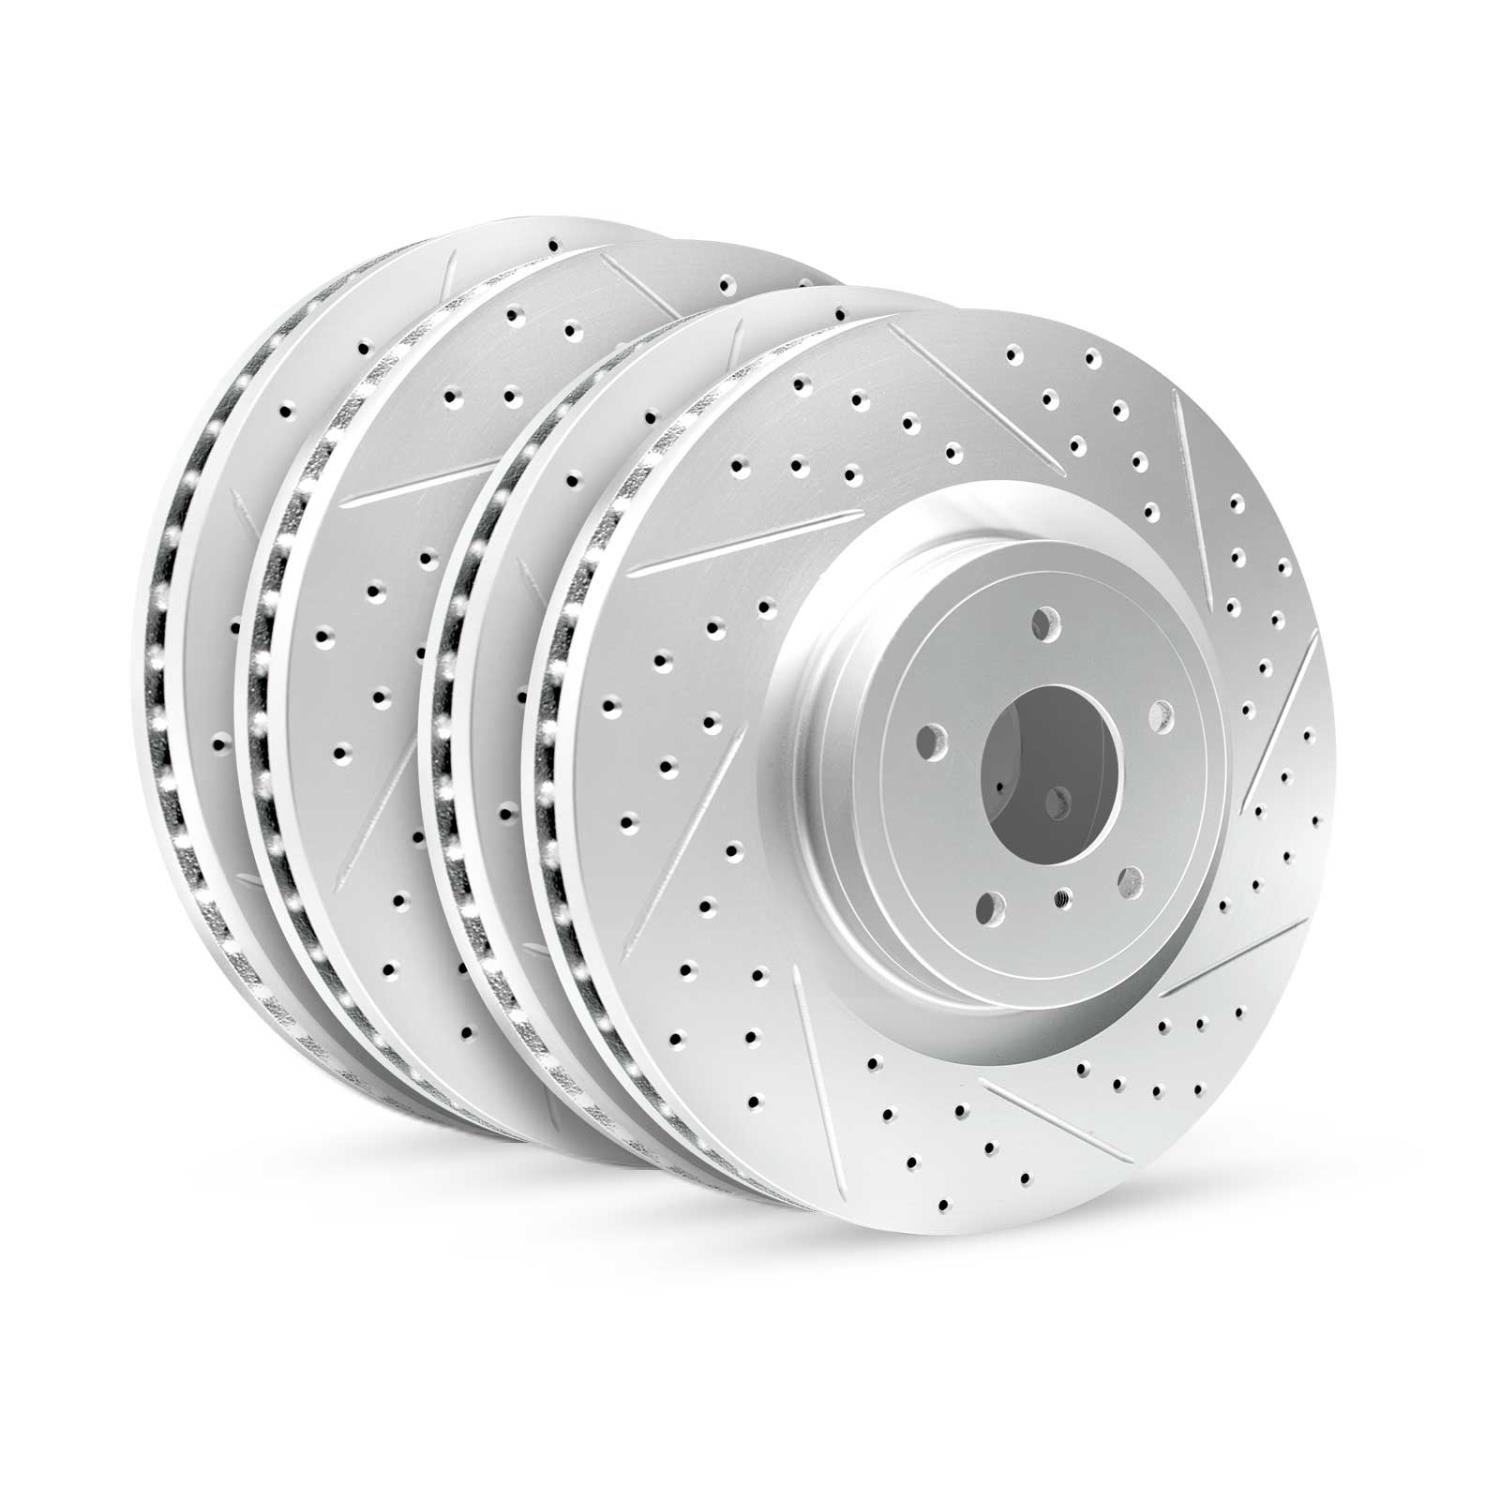 GEO-Carbon Drilled/Slotted Rotors, 2010-2018 BMW, Position: Front/Rear